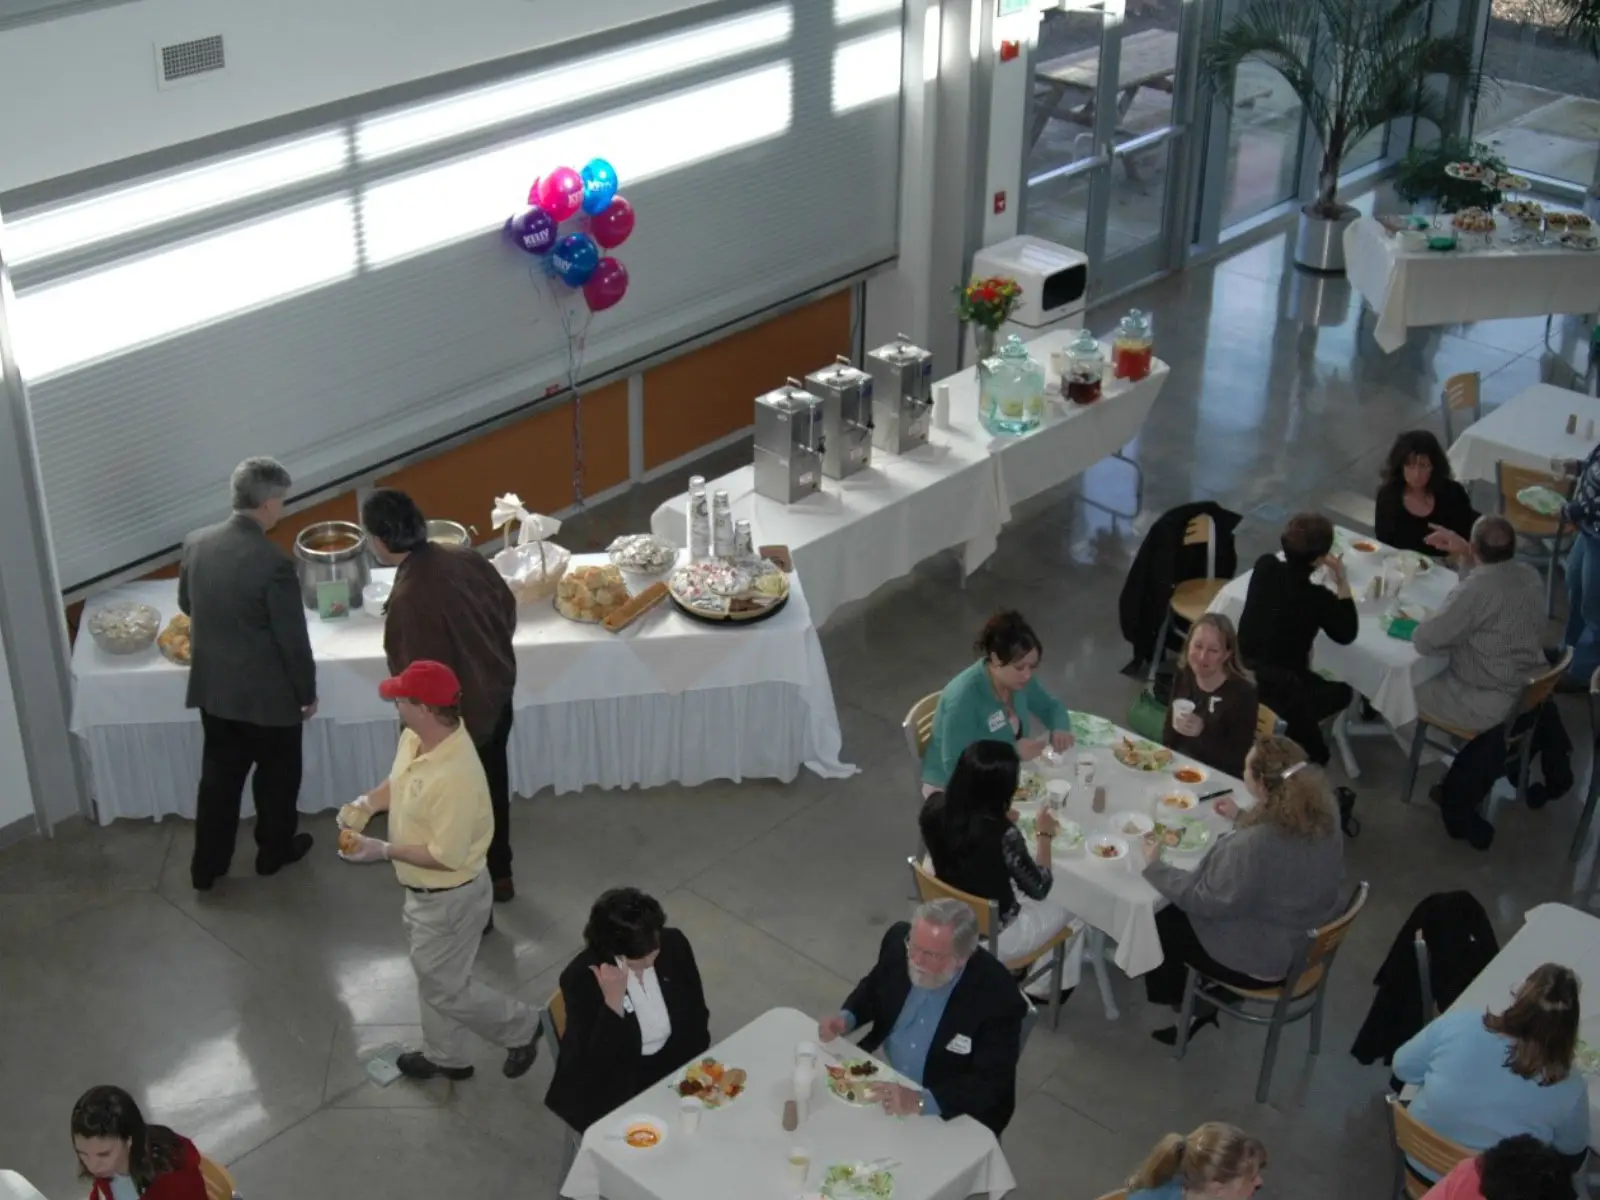 Overhead view of a catered event with various foods and drinks at the Wilsonville campus in the commons